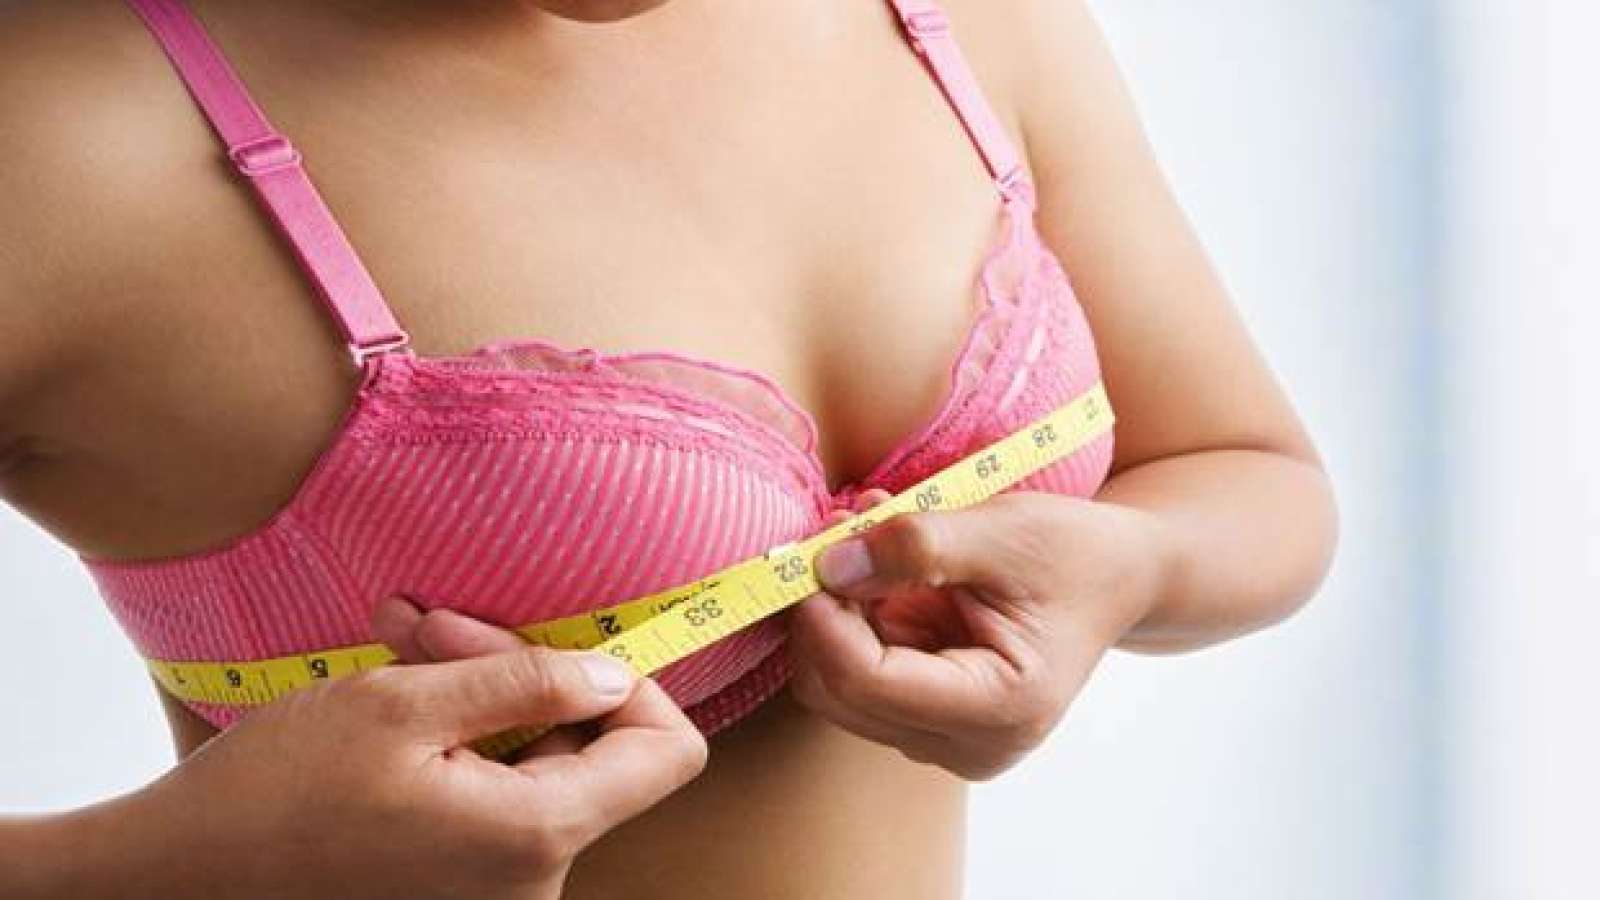 Average Breast Sizes Of Women Around The World. Check Out Nigeria